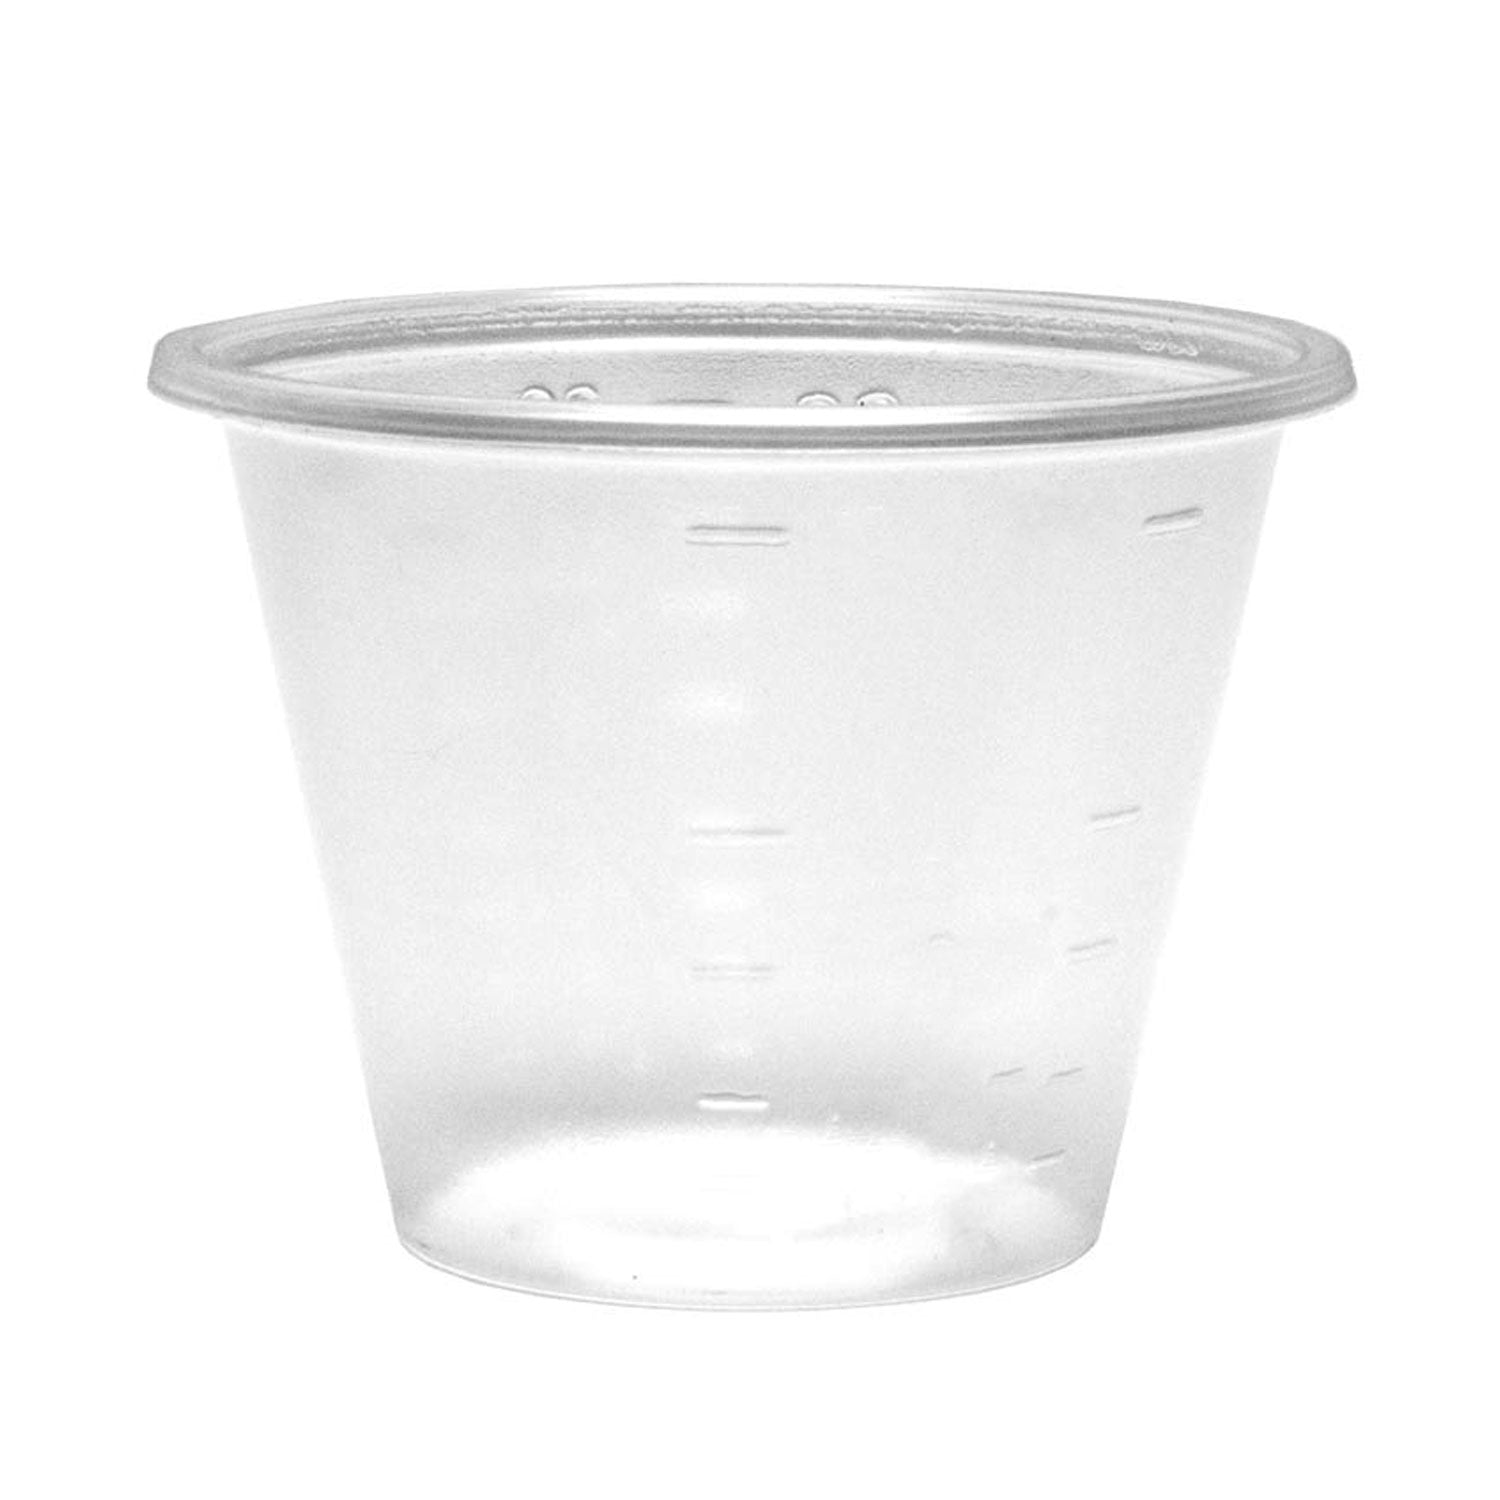 12-Ounce Mixing Cups